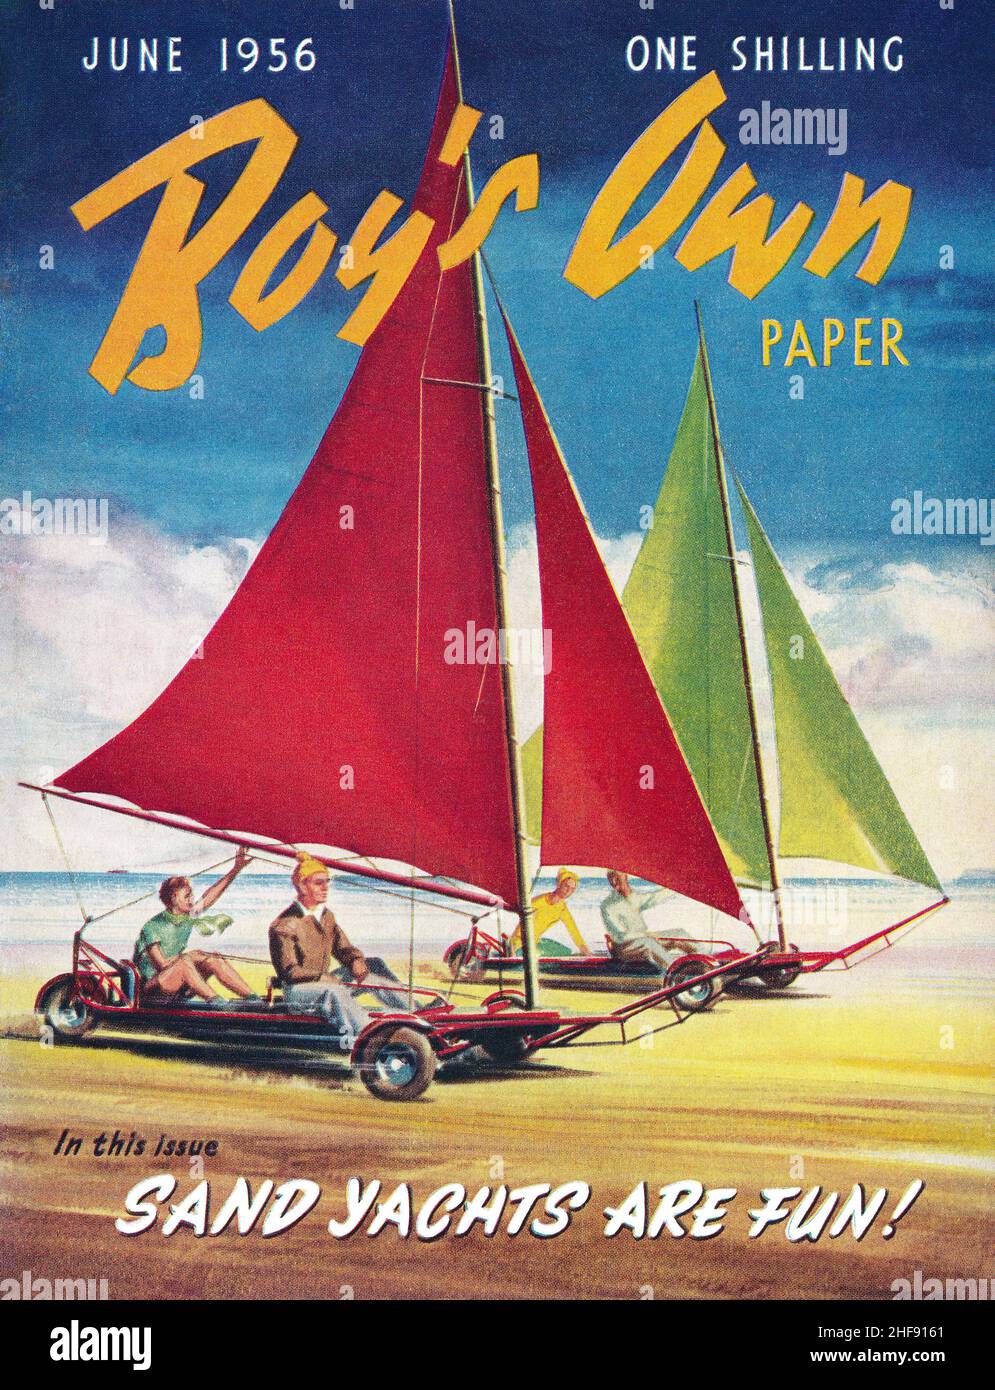 Vintage magazine front cover of the Boy's Own Paper for June 1956, with an illustration of land yachts. Stock Photo